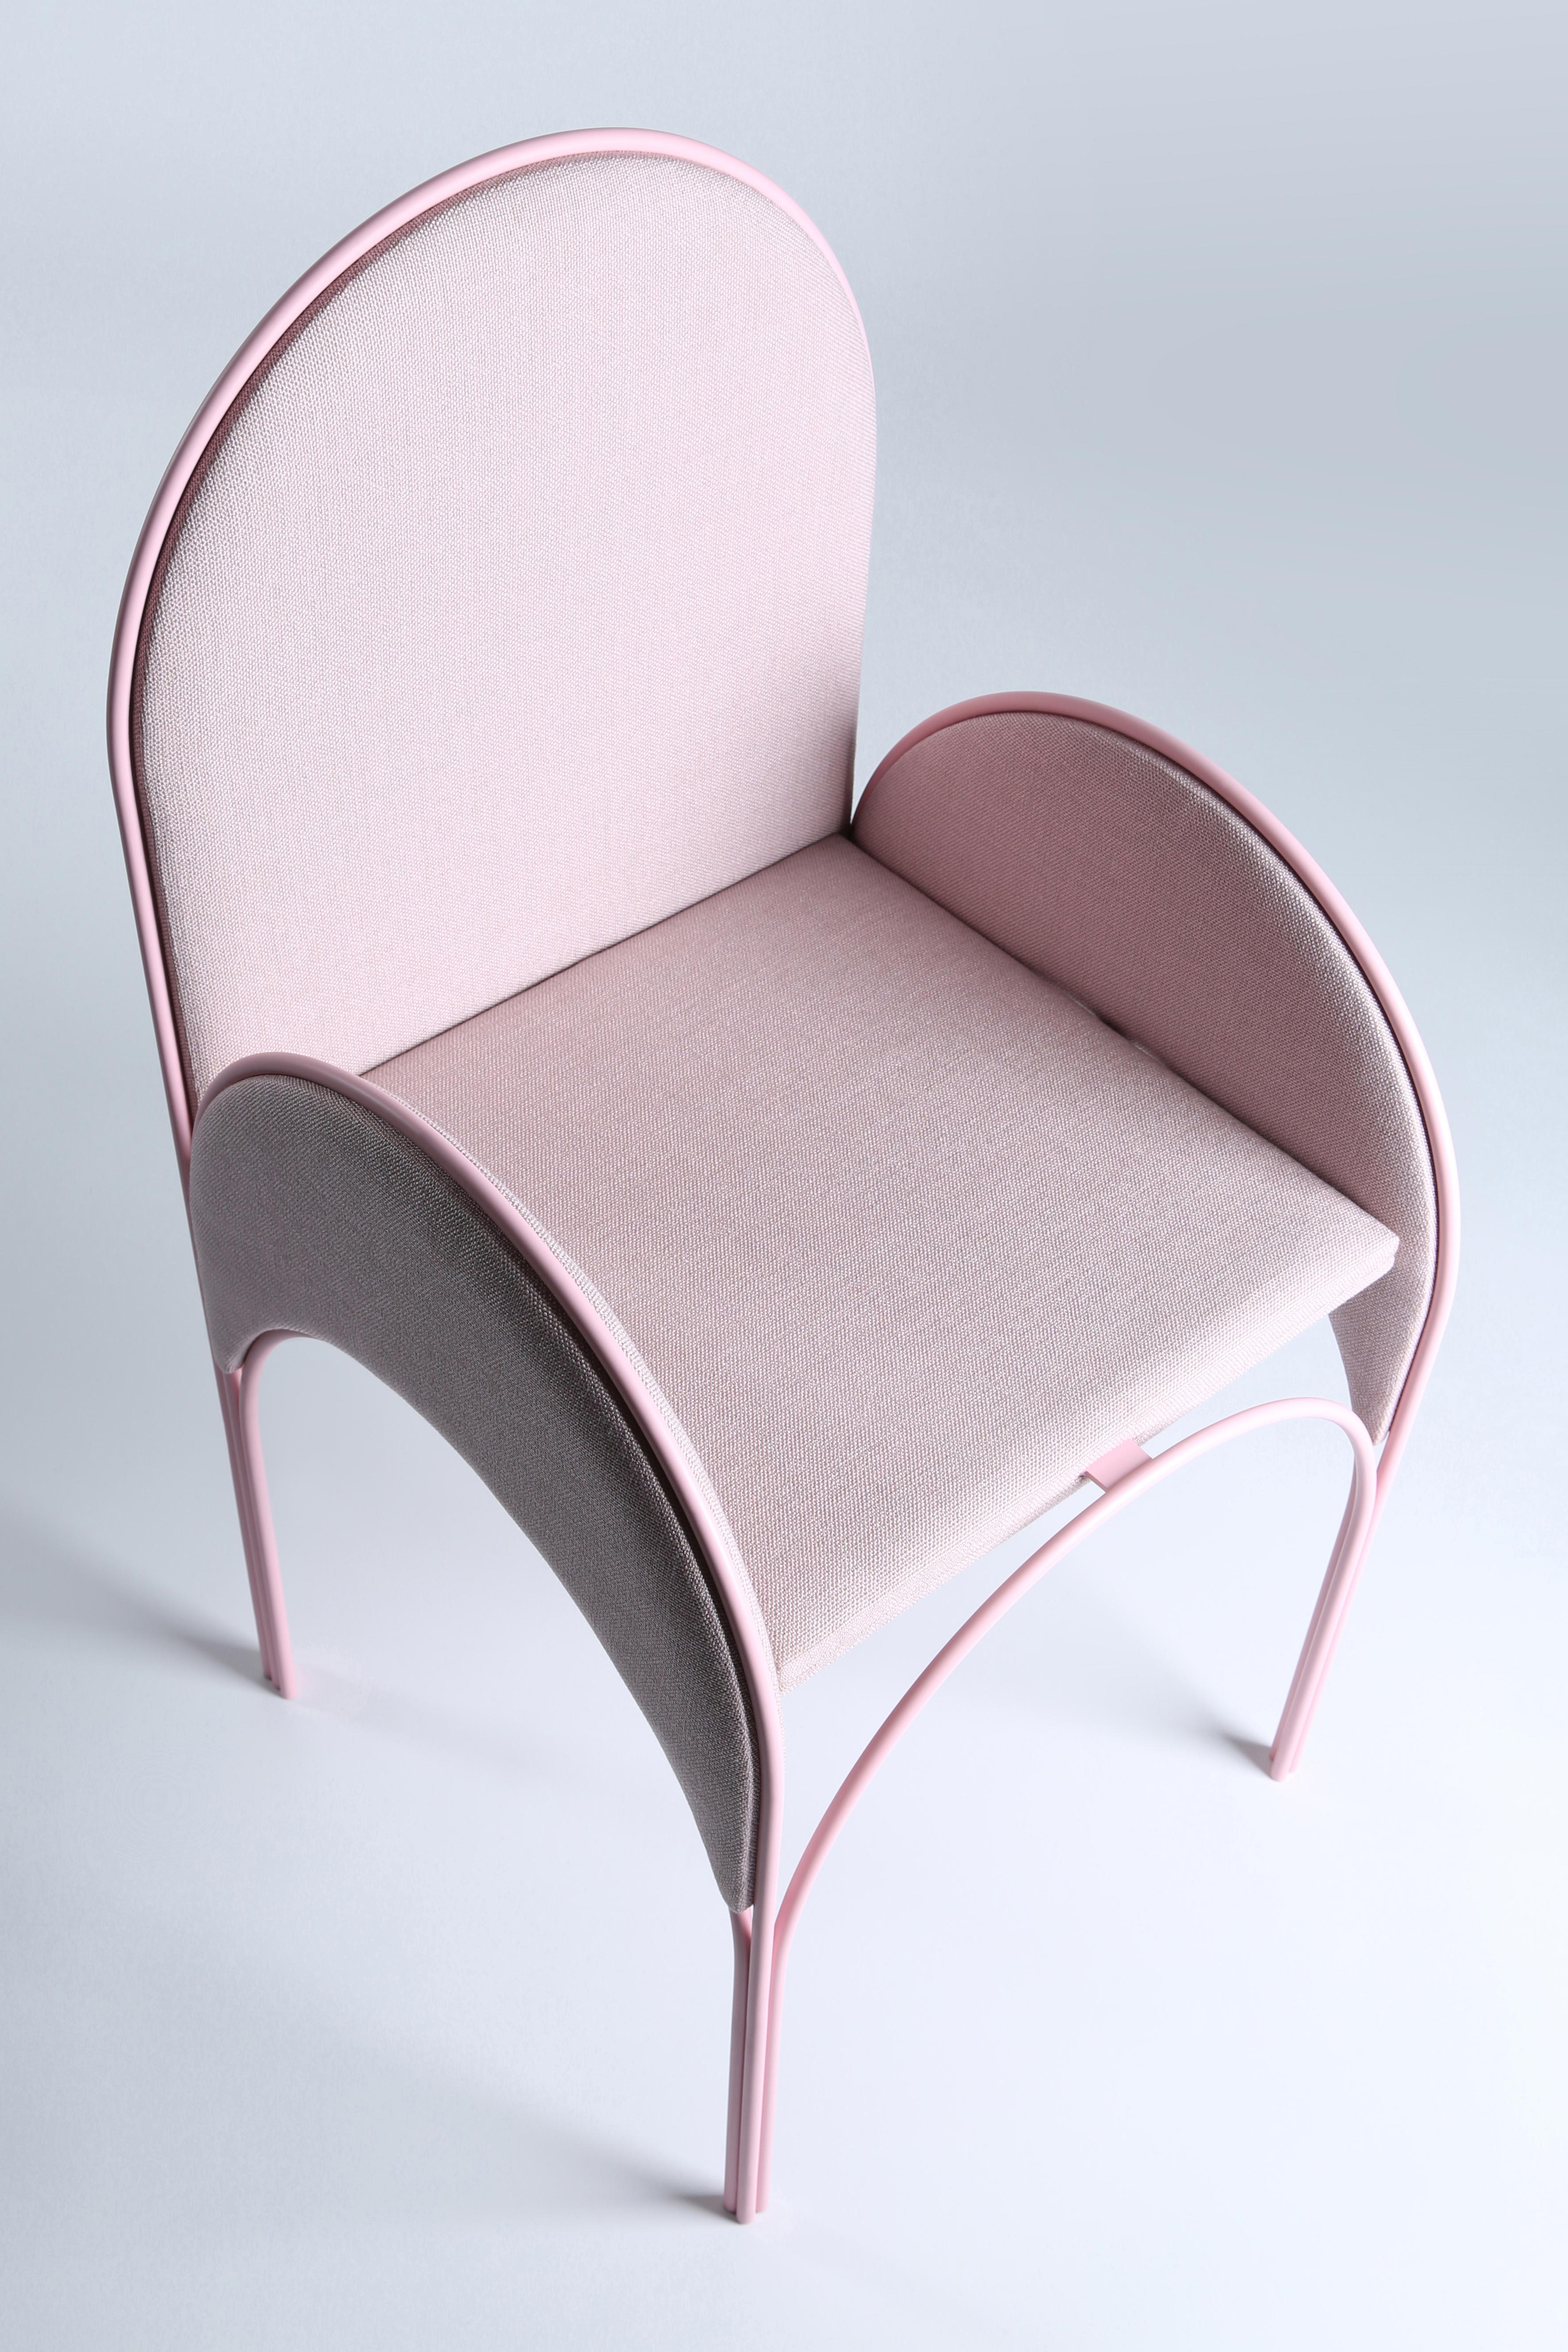 Hawa Beirut pink chair by Richard Yasmine
Materials: Structure in powder-coated metal, fabric upholstery 
Dimensions: H 92 cm x W 46cm x D 47cm

HAWA Beirut, a collection of very light or airy furniture inspired from the Lebanese architecture